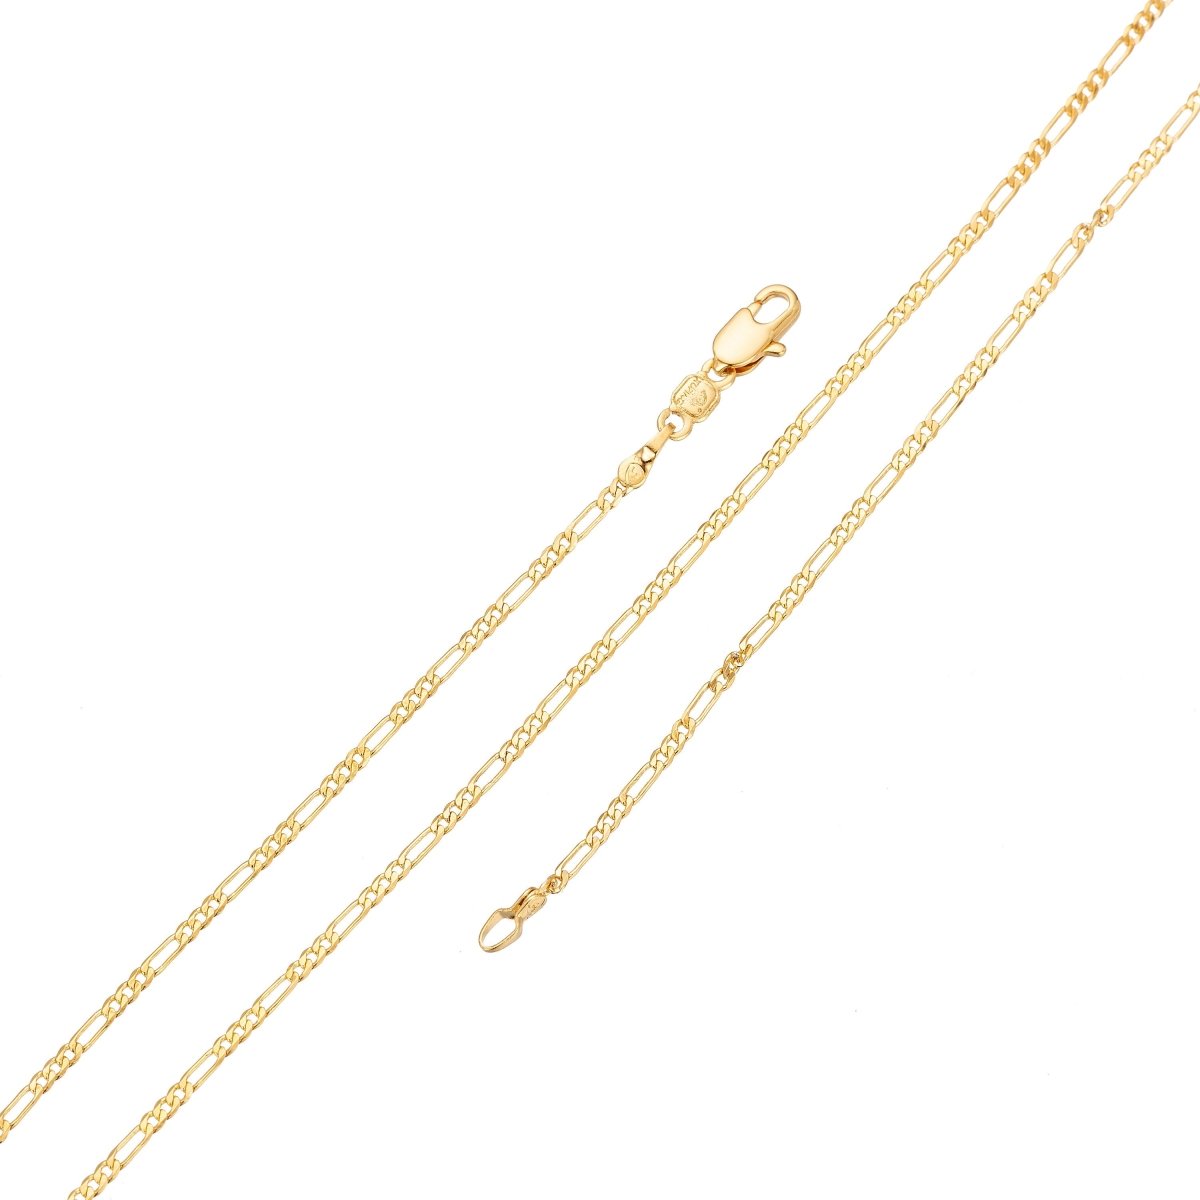 Dainty Figaro Necklace, Finished Chain figaro 24k Gold Filled Chain Minimalist Layer Necklace 19.5 inch 1.5mm "Yellow Gold Chain" | CN-475 Clearance Pricing - DLUXCA